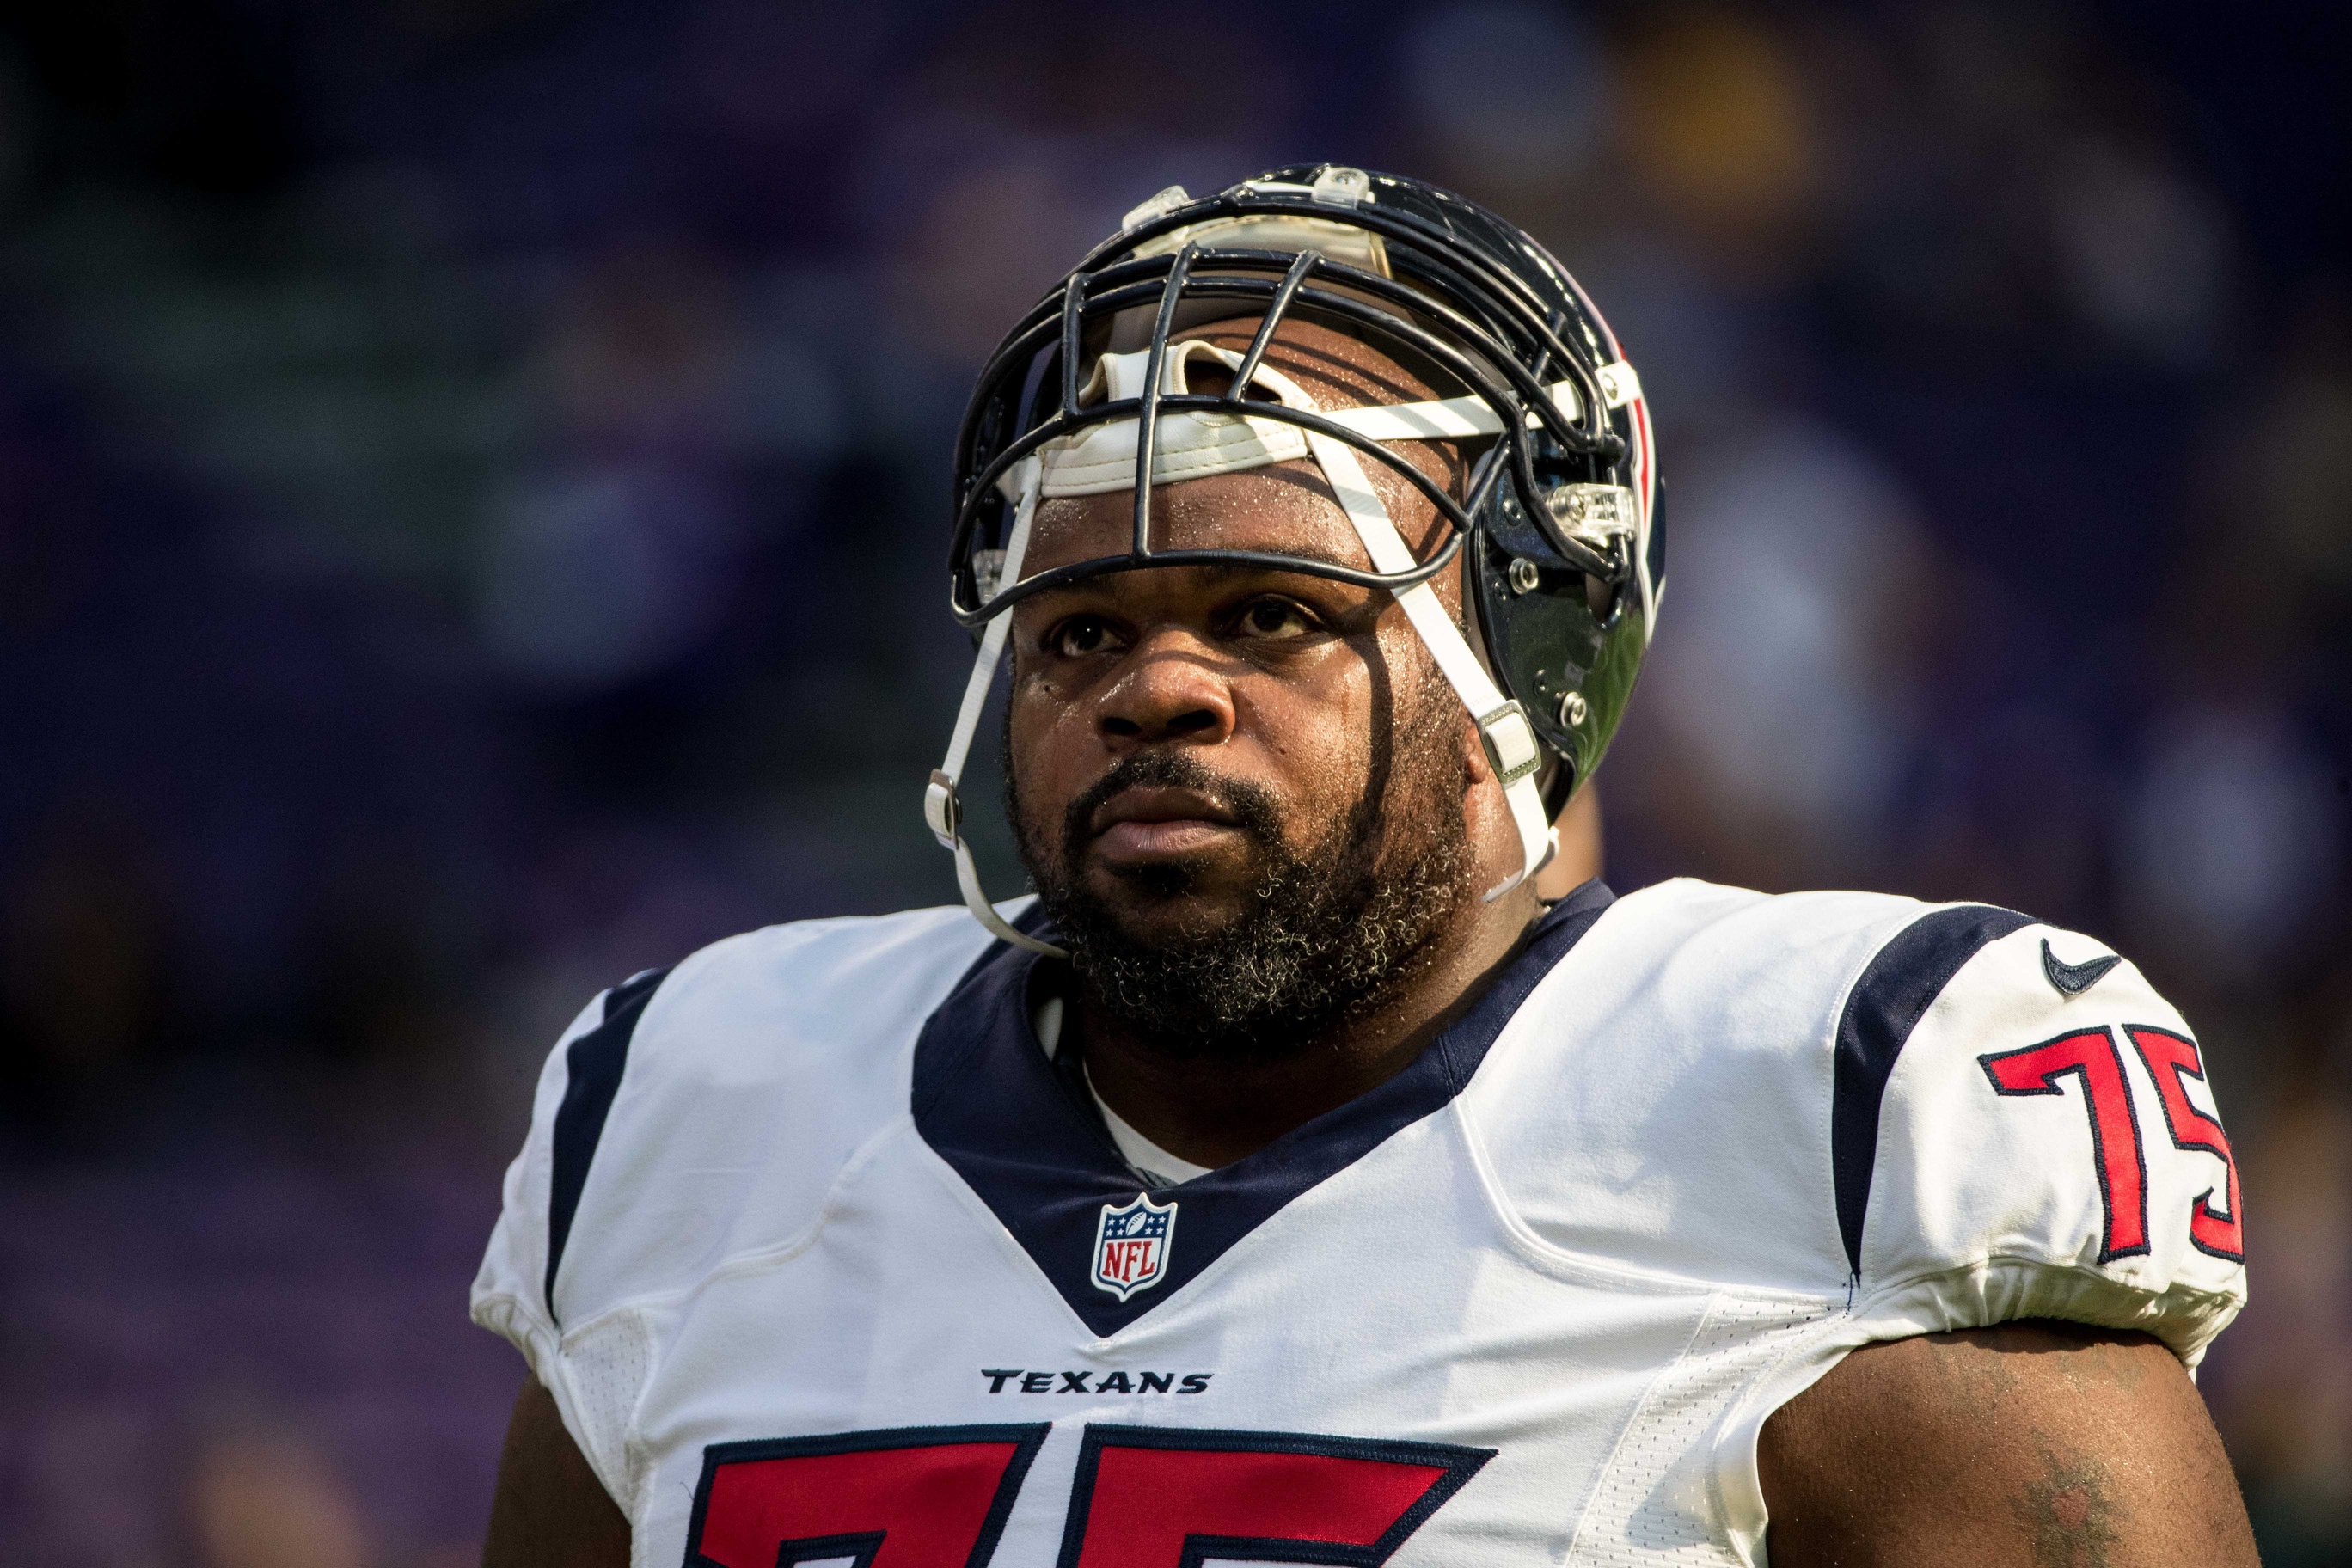 Wilfork, The In-Vince-Able - Vince Wilfork Career Highlights 